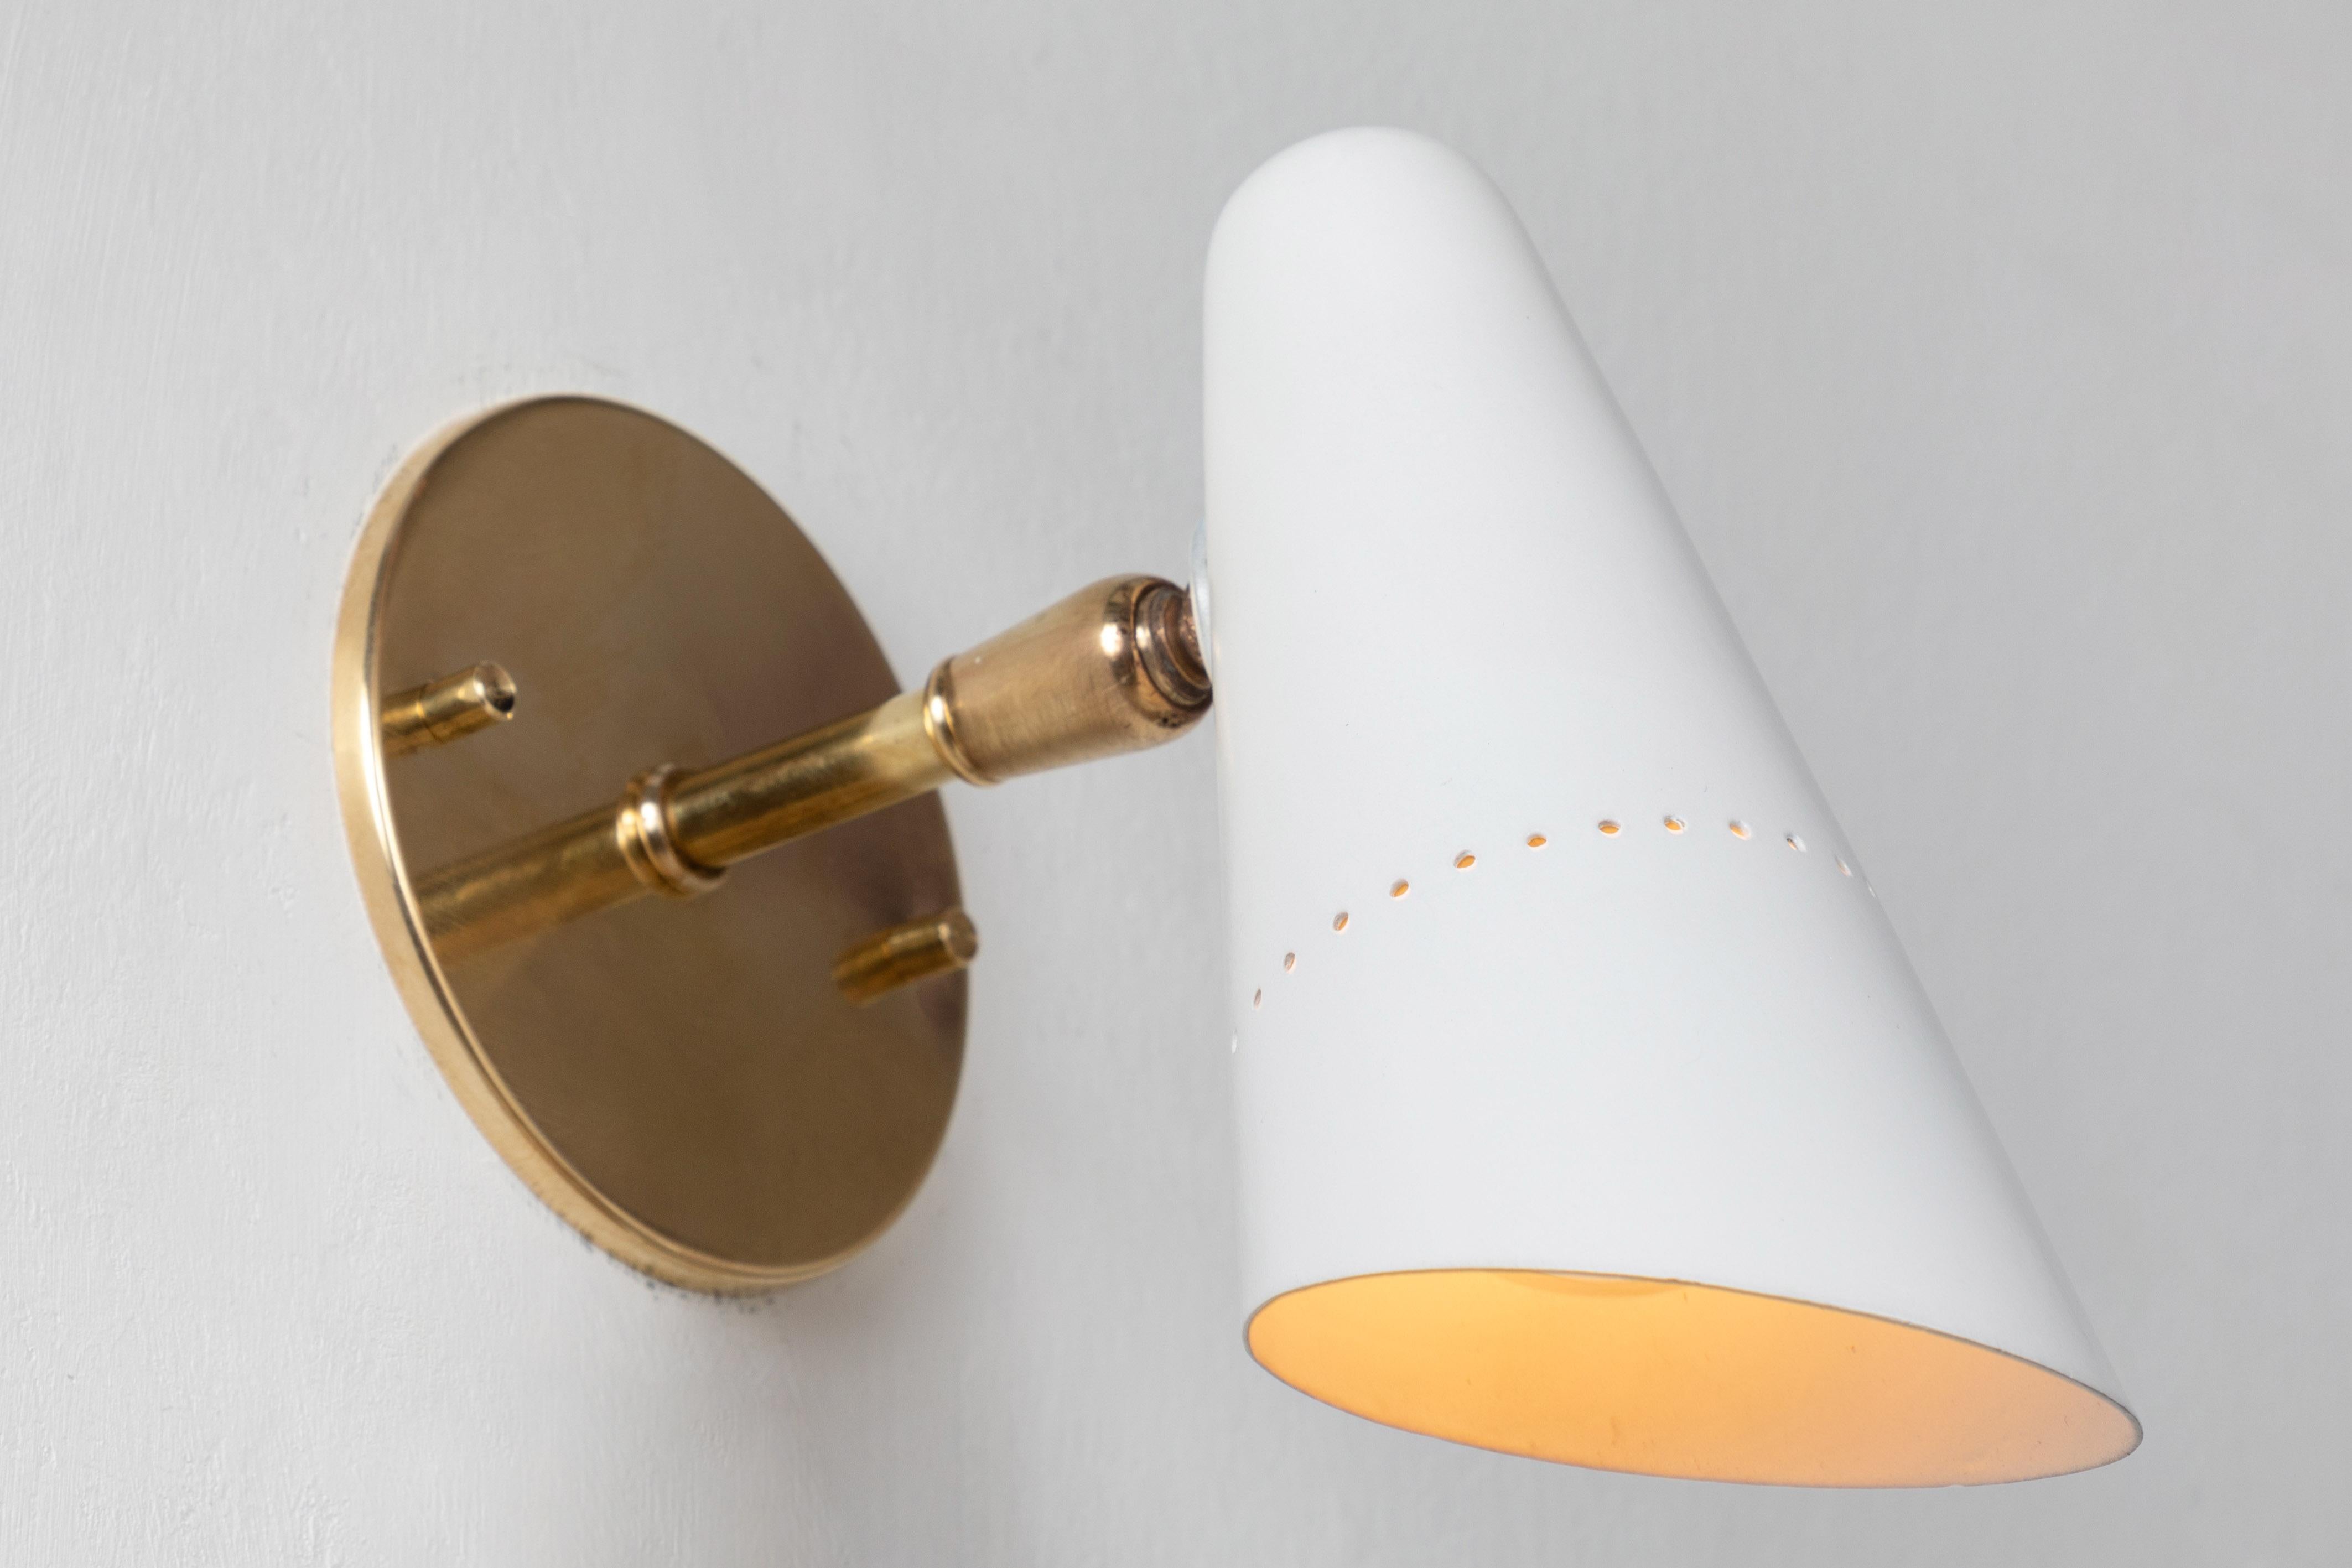 1950s Italian white articulating sconces attributed to Gino Sarfatti. Executed in brass and white painted aluminum. Sconces pivot up/down and left/right on a ball joint. Custom period styled brass backplates with brass hardware for hardwiring over a